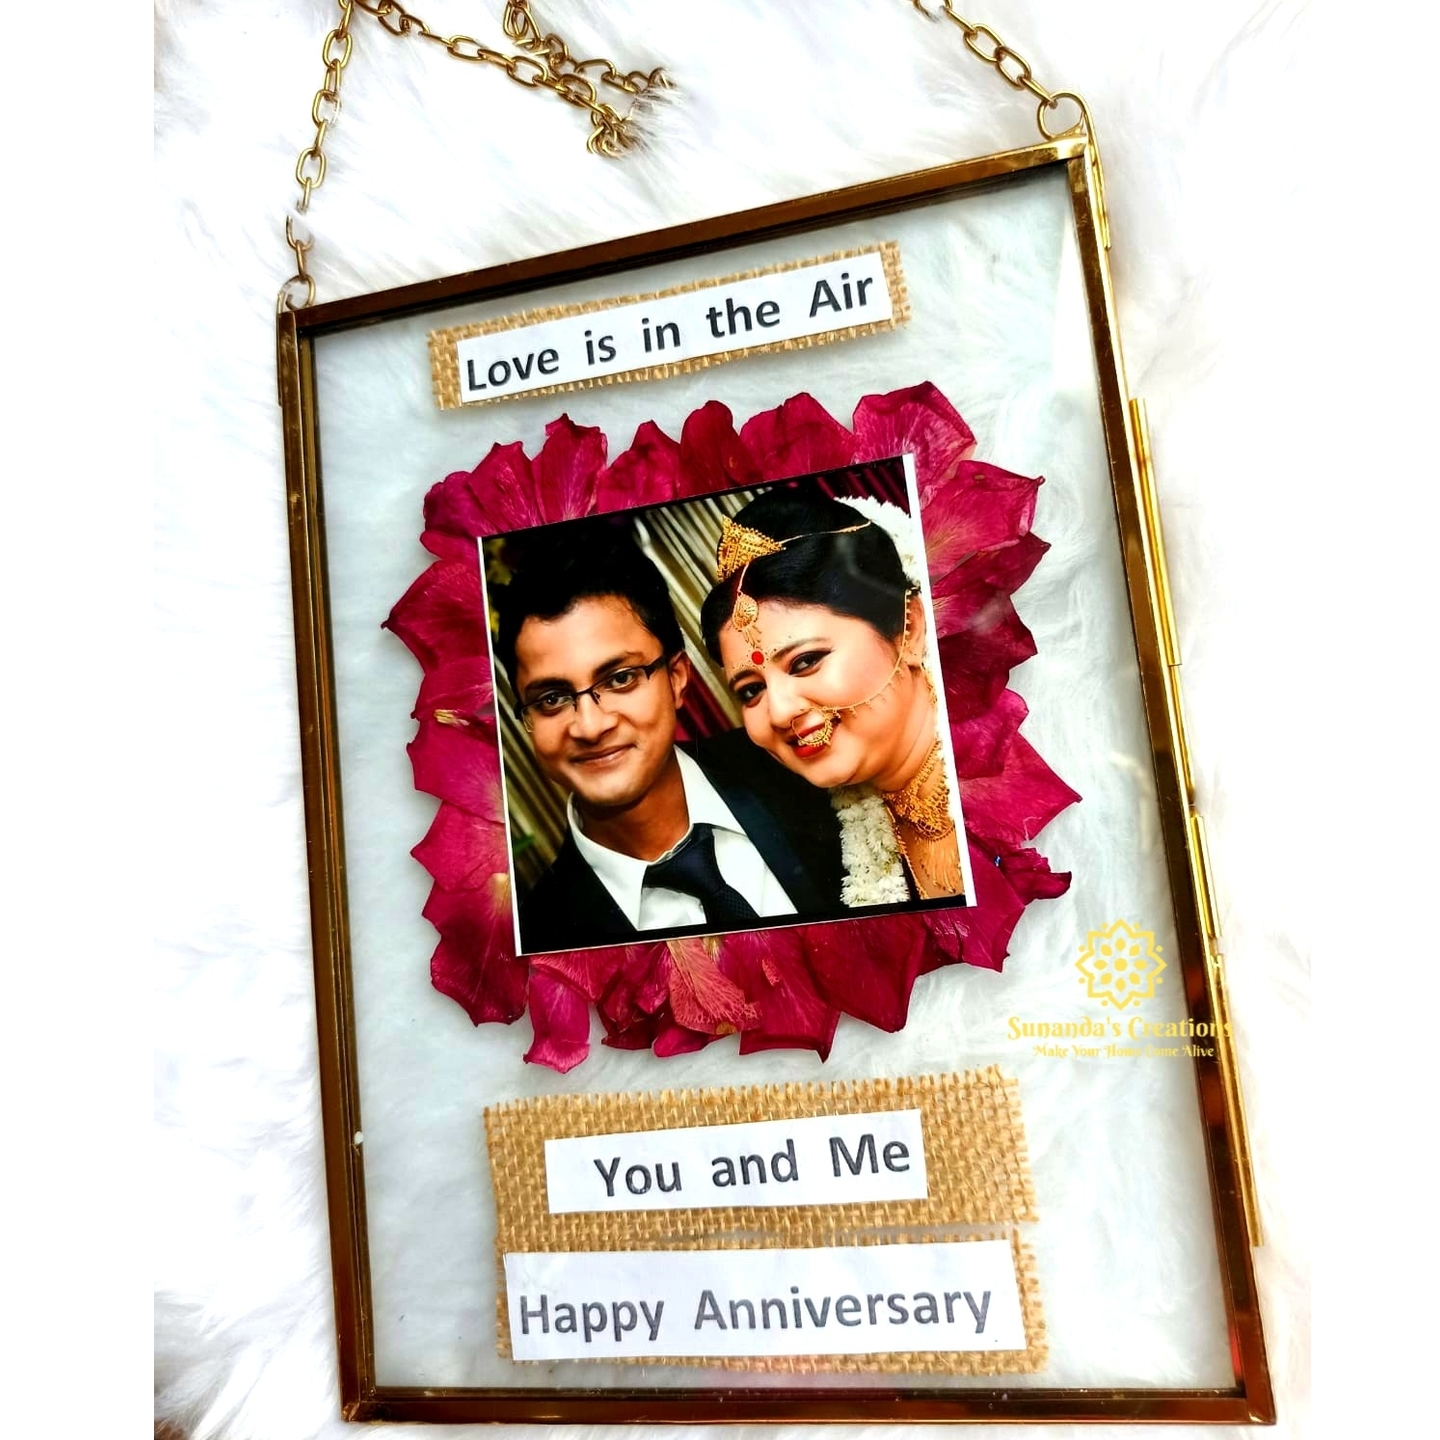 Vintage Glass Photo Frame with quoted lines